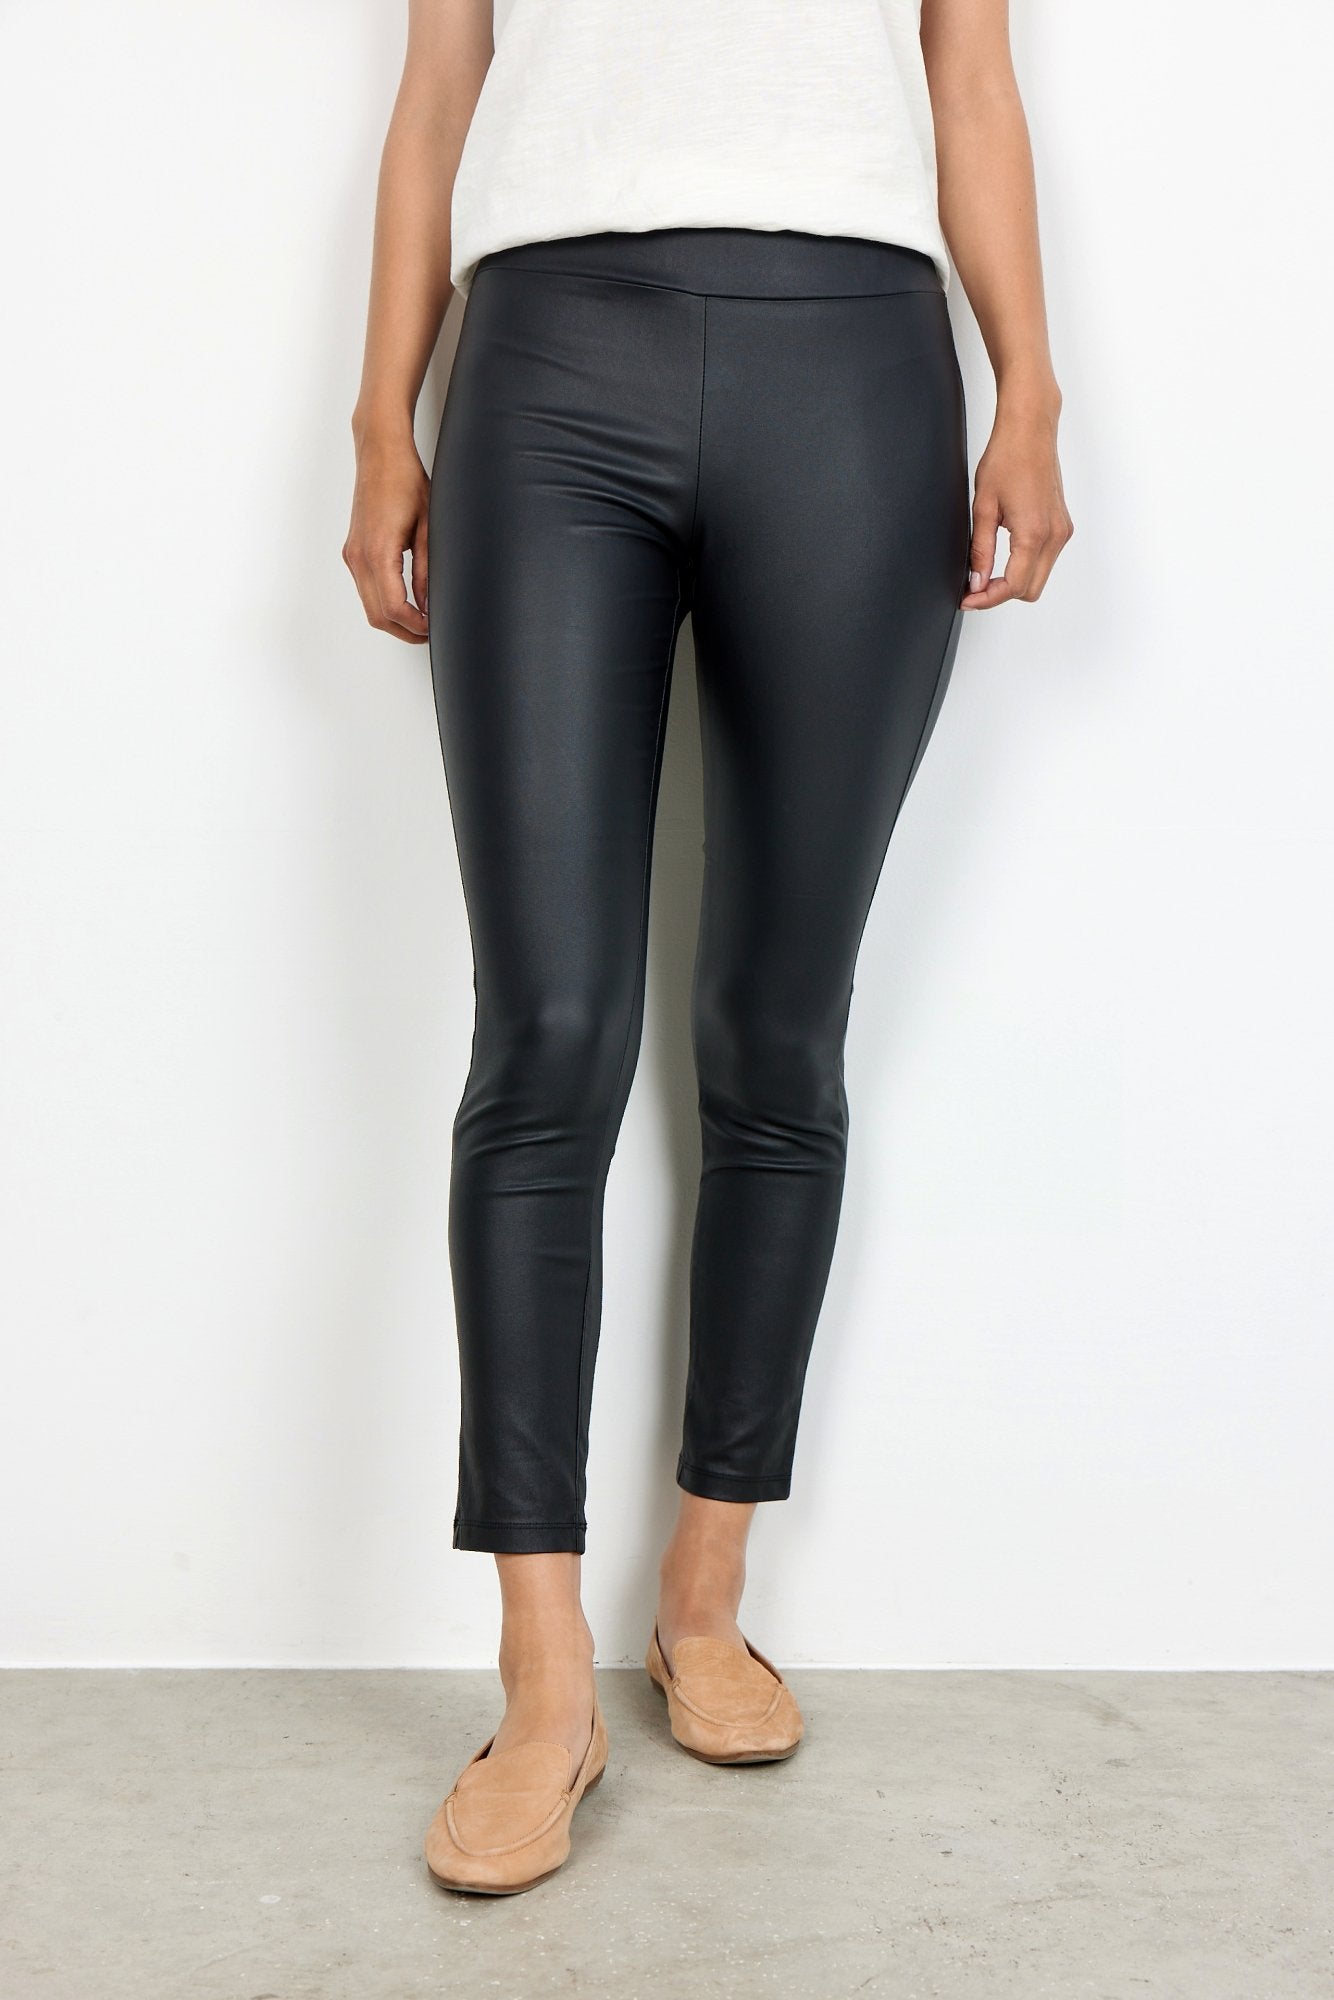 SC-PAM soyaconcept – Pants Soyaconcept | Black 2-B from soyaconcept in